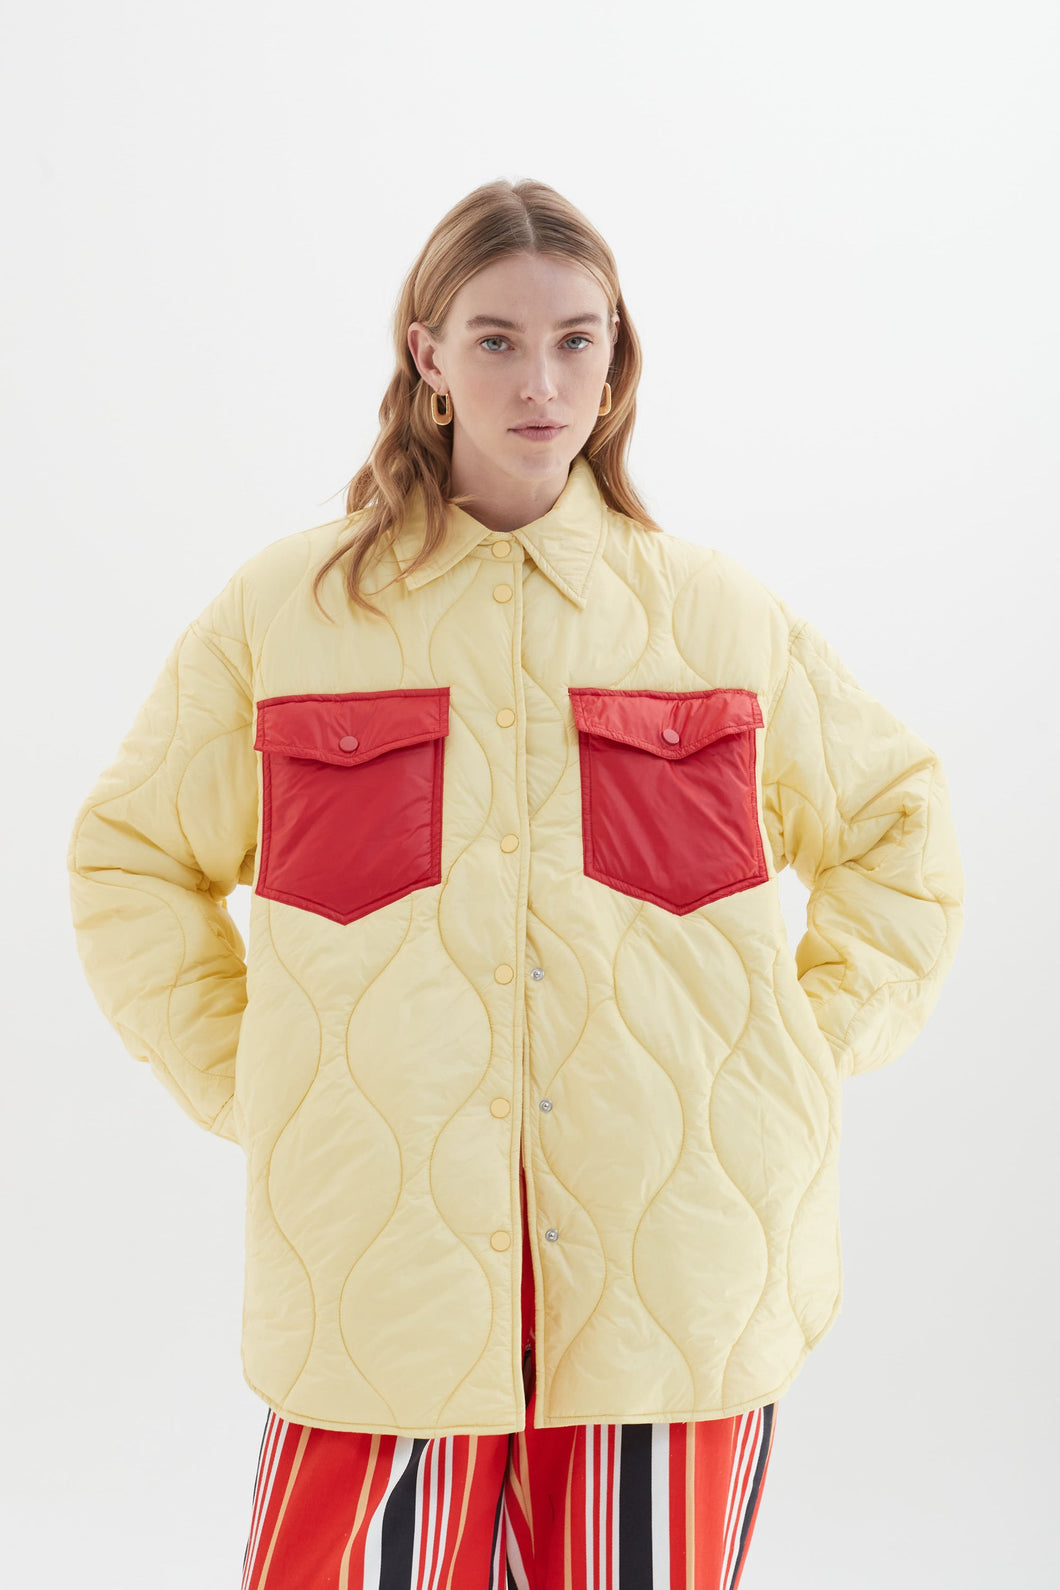 BUCKLEY JACKET IN YELLOW/RED